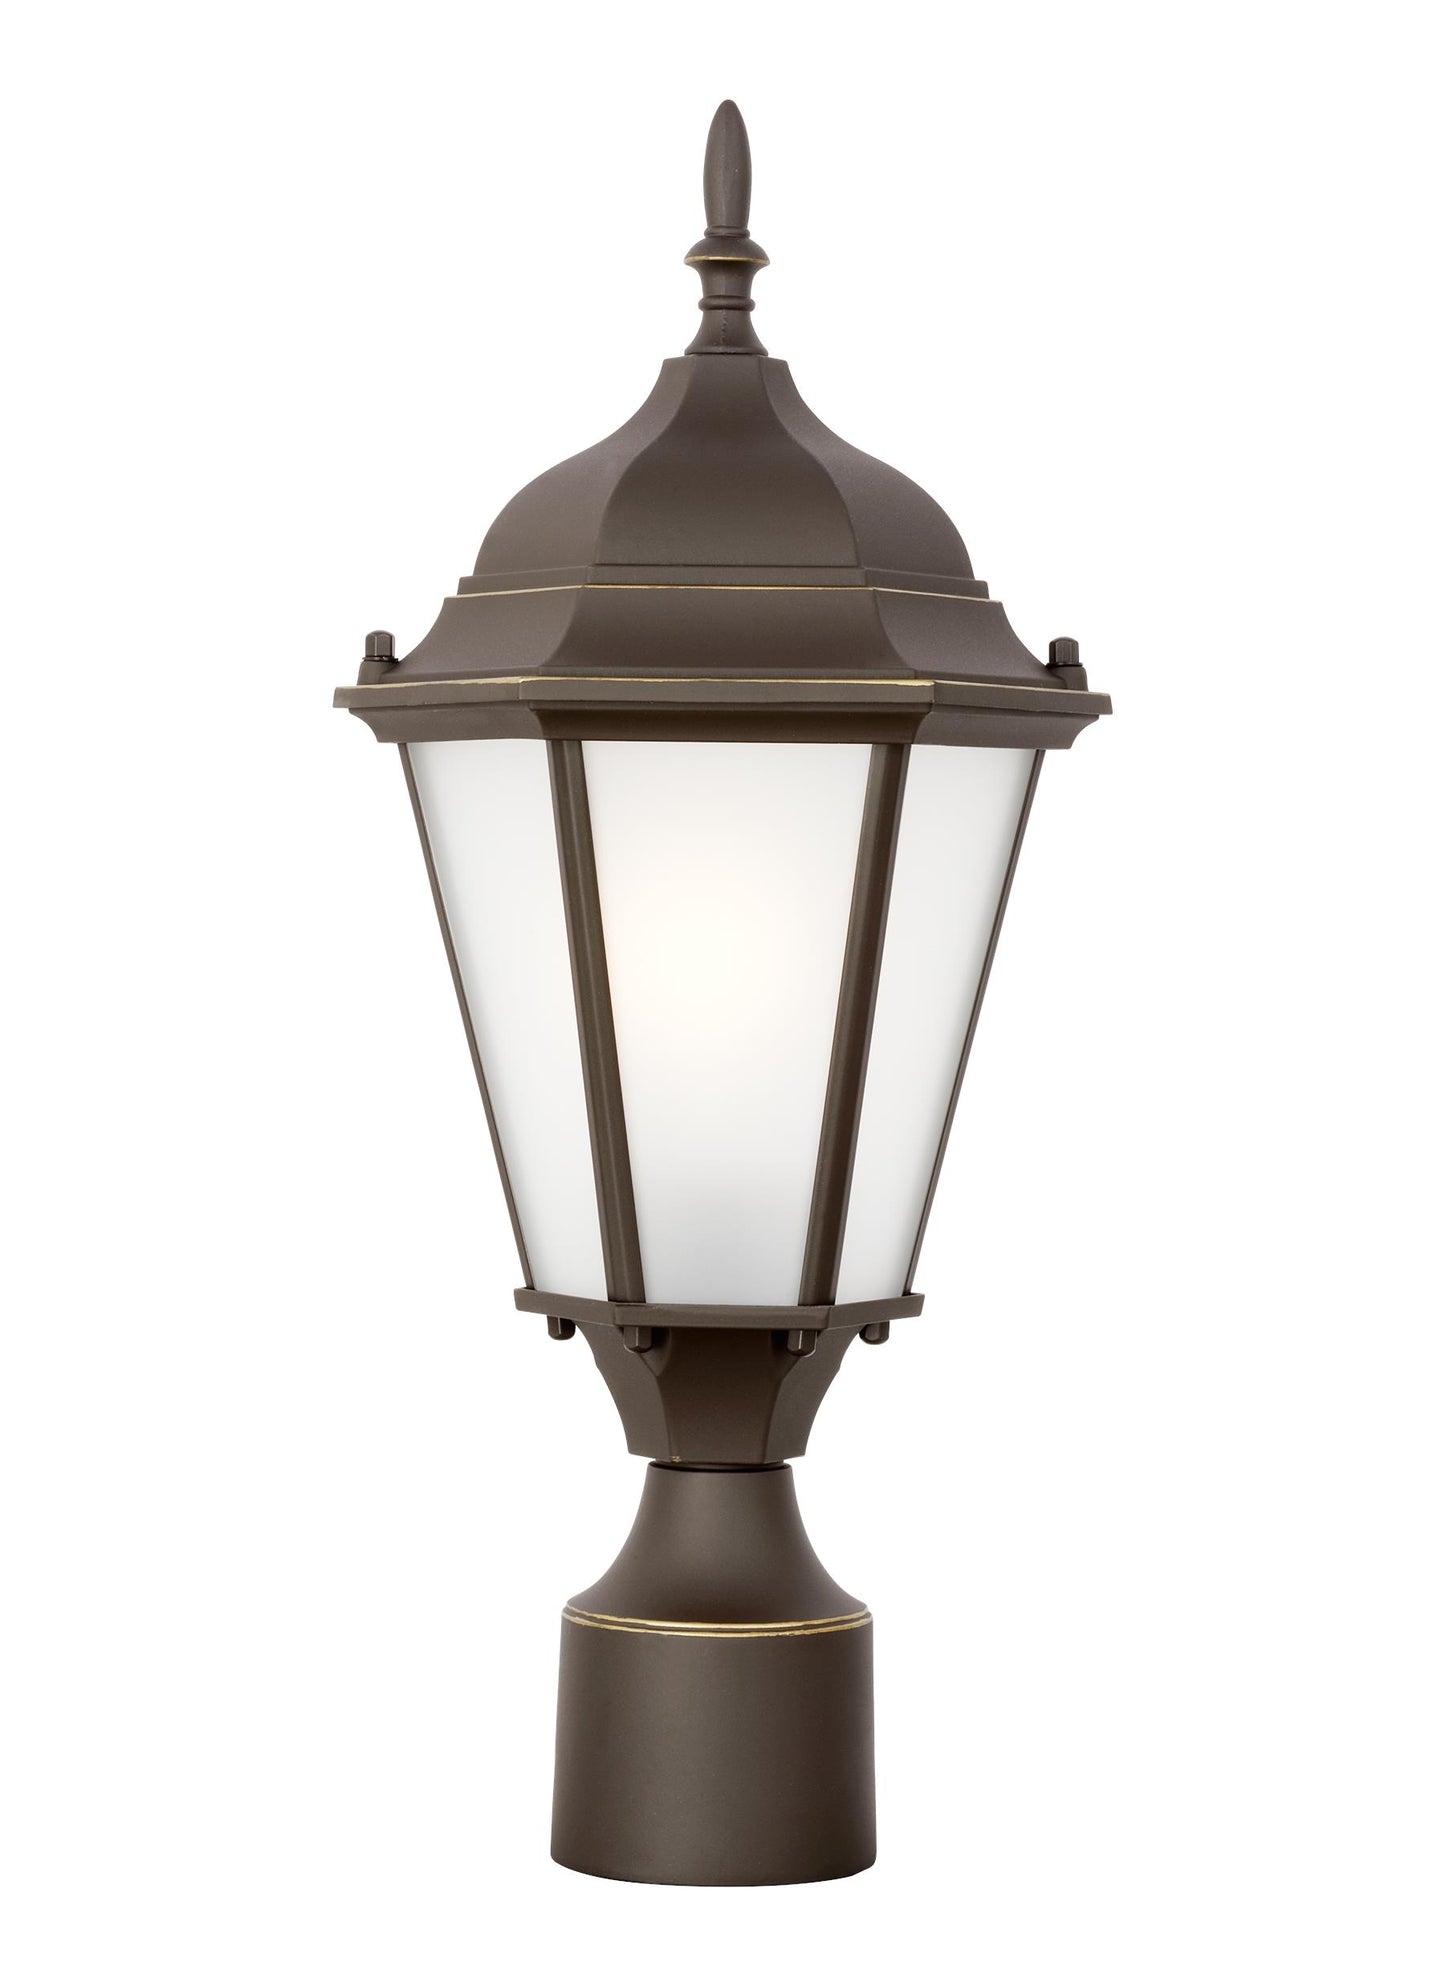 Bakersville traditional 1-light outdoor exterior post lantern in antique bronze finish with satin etched glass panels